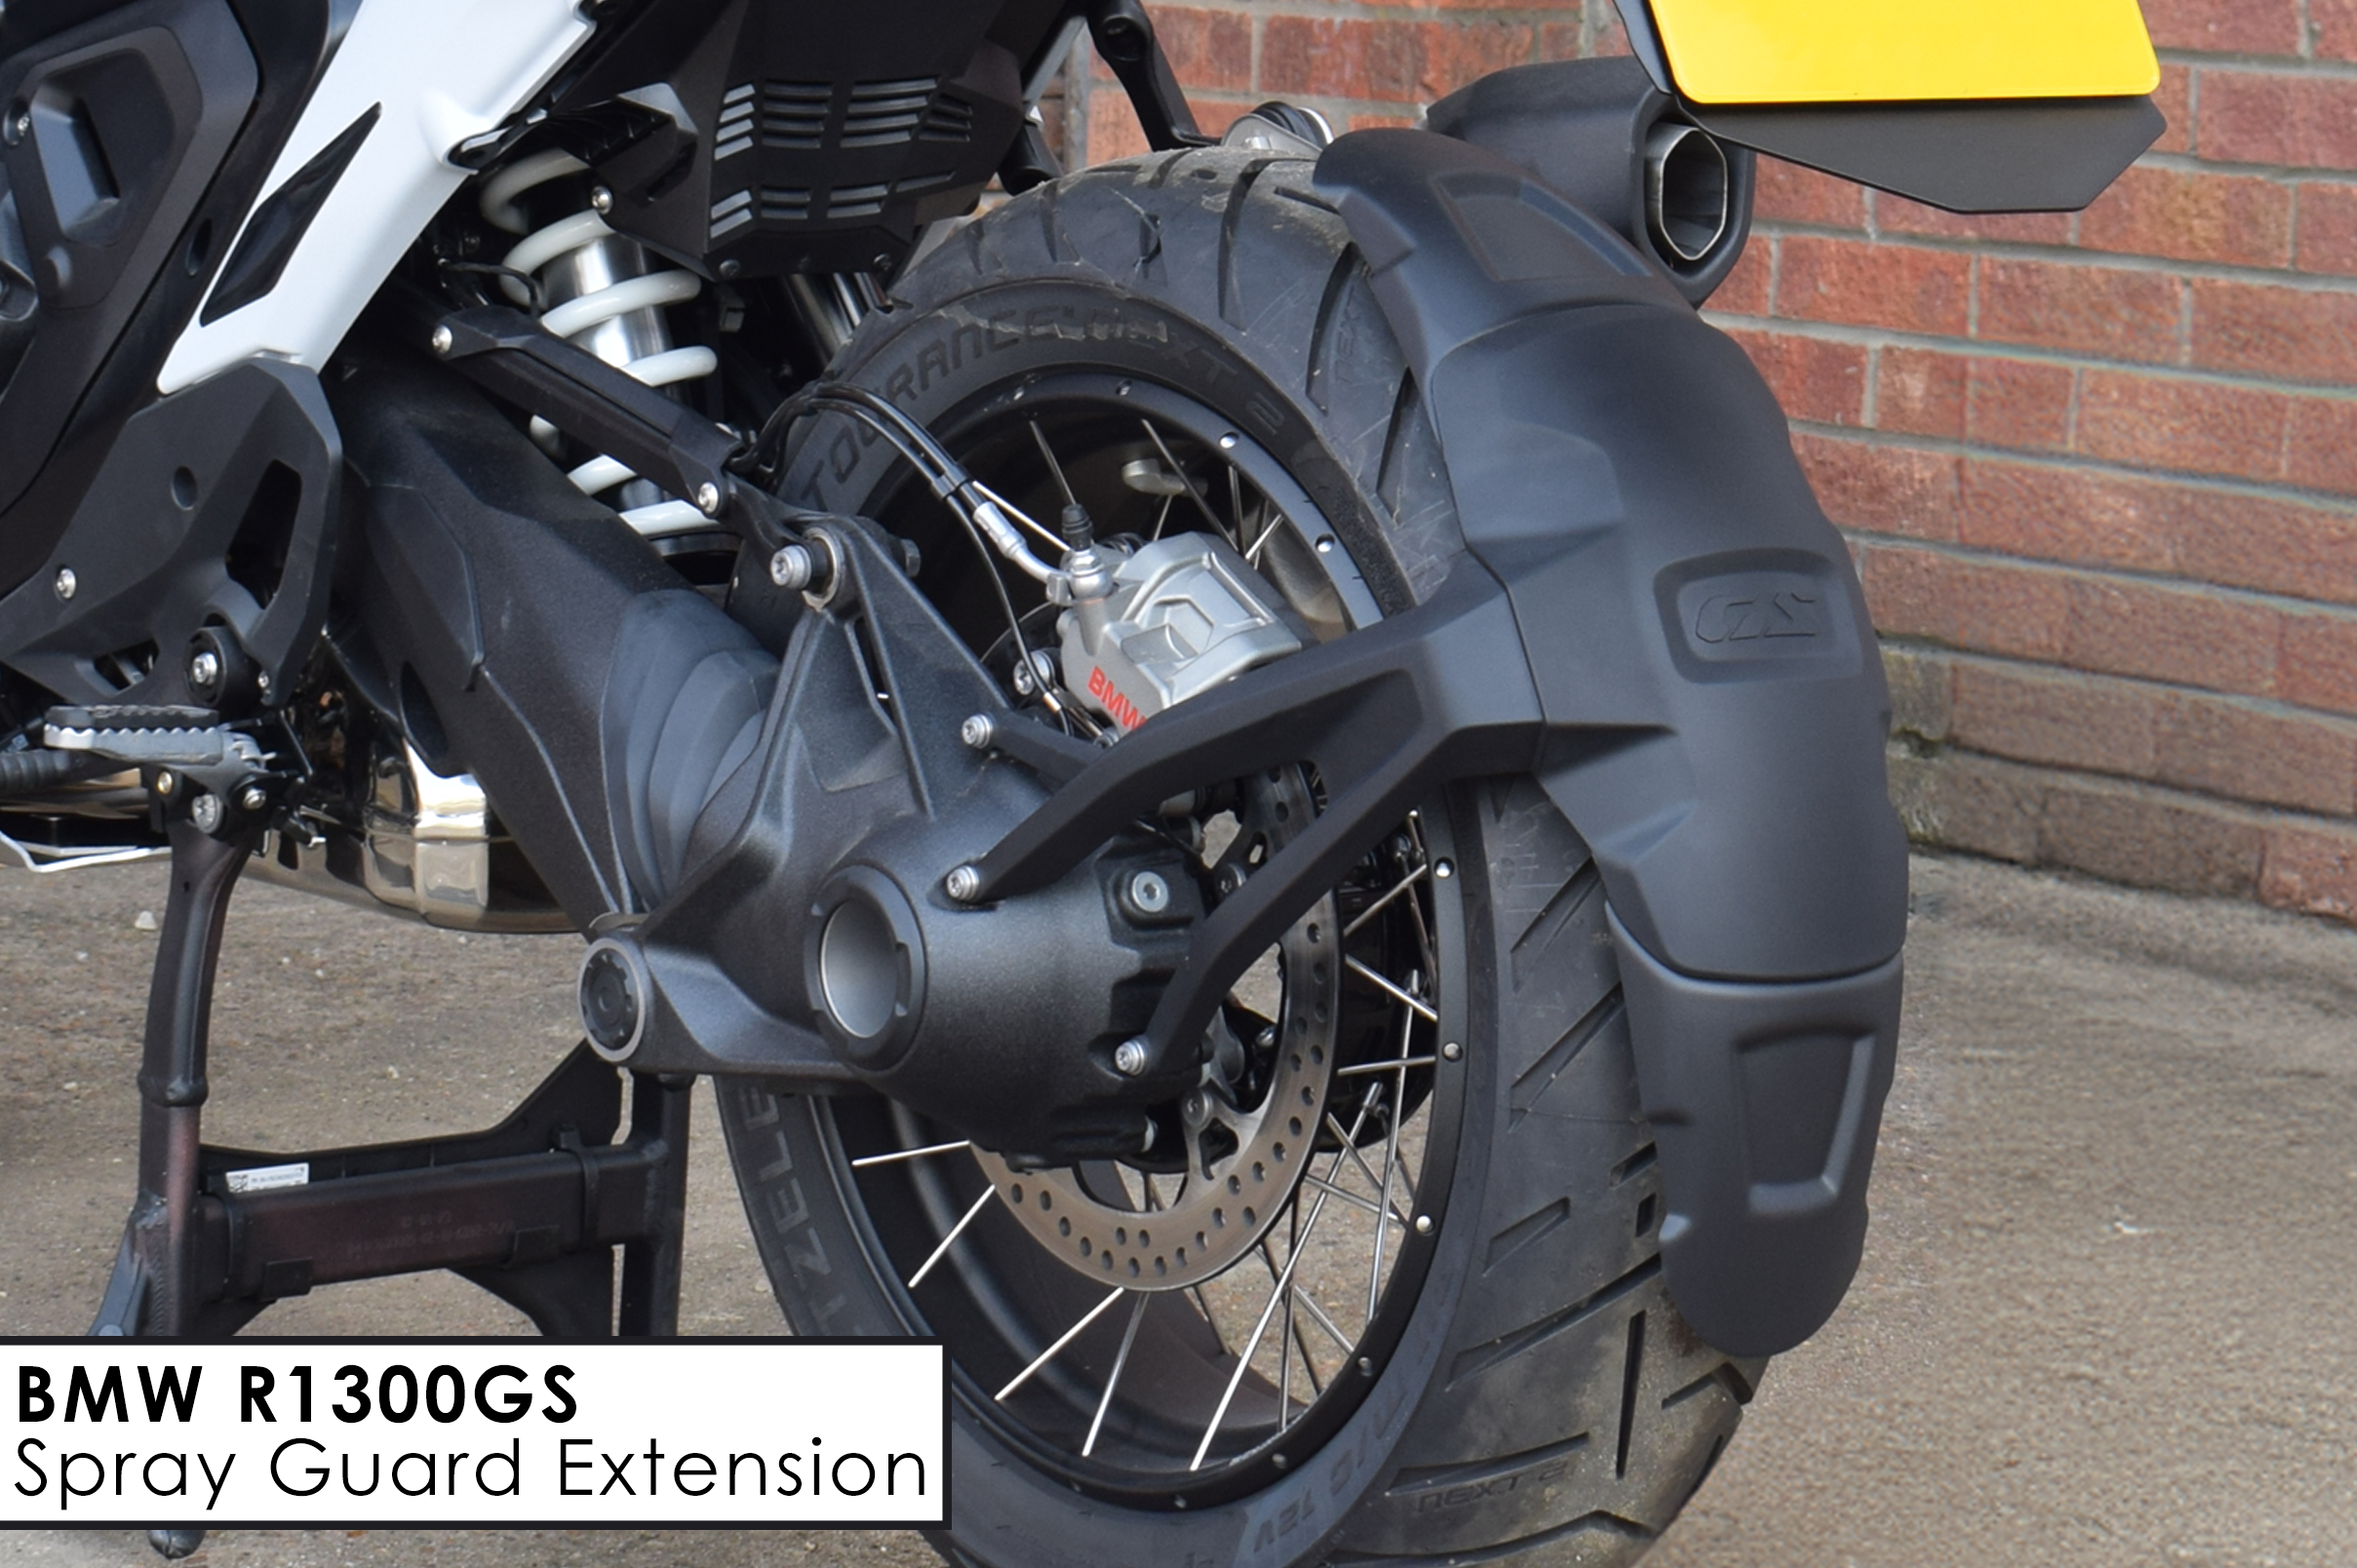 The R1300GS Gets A Spray Guard Extension!